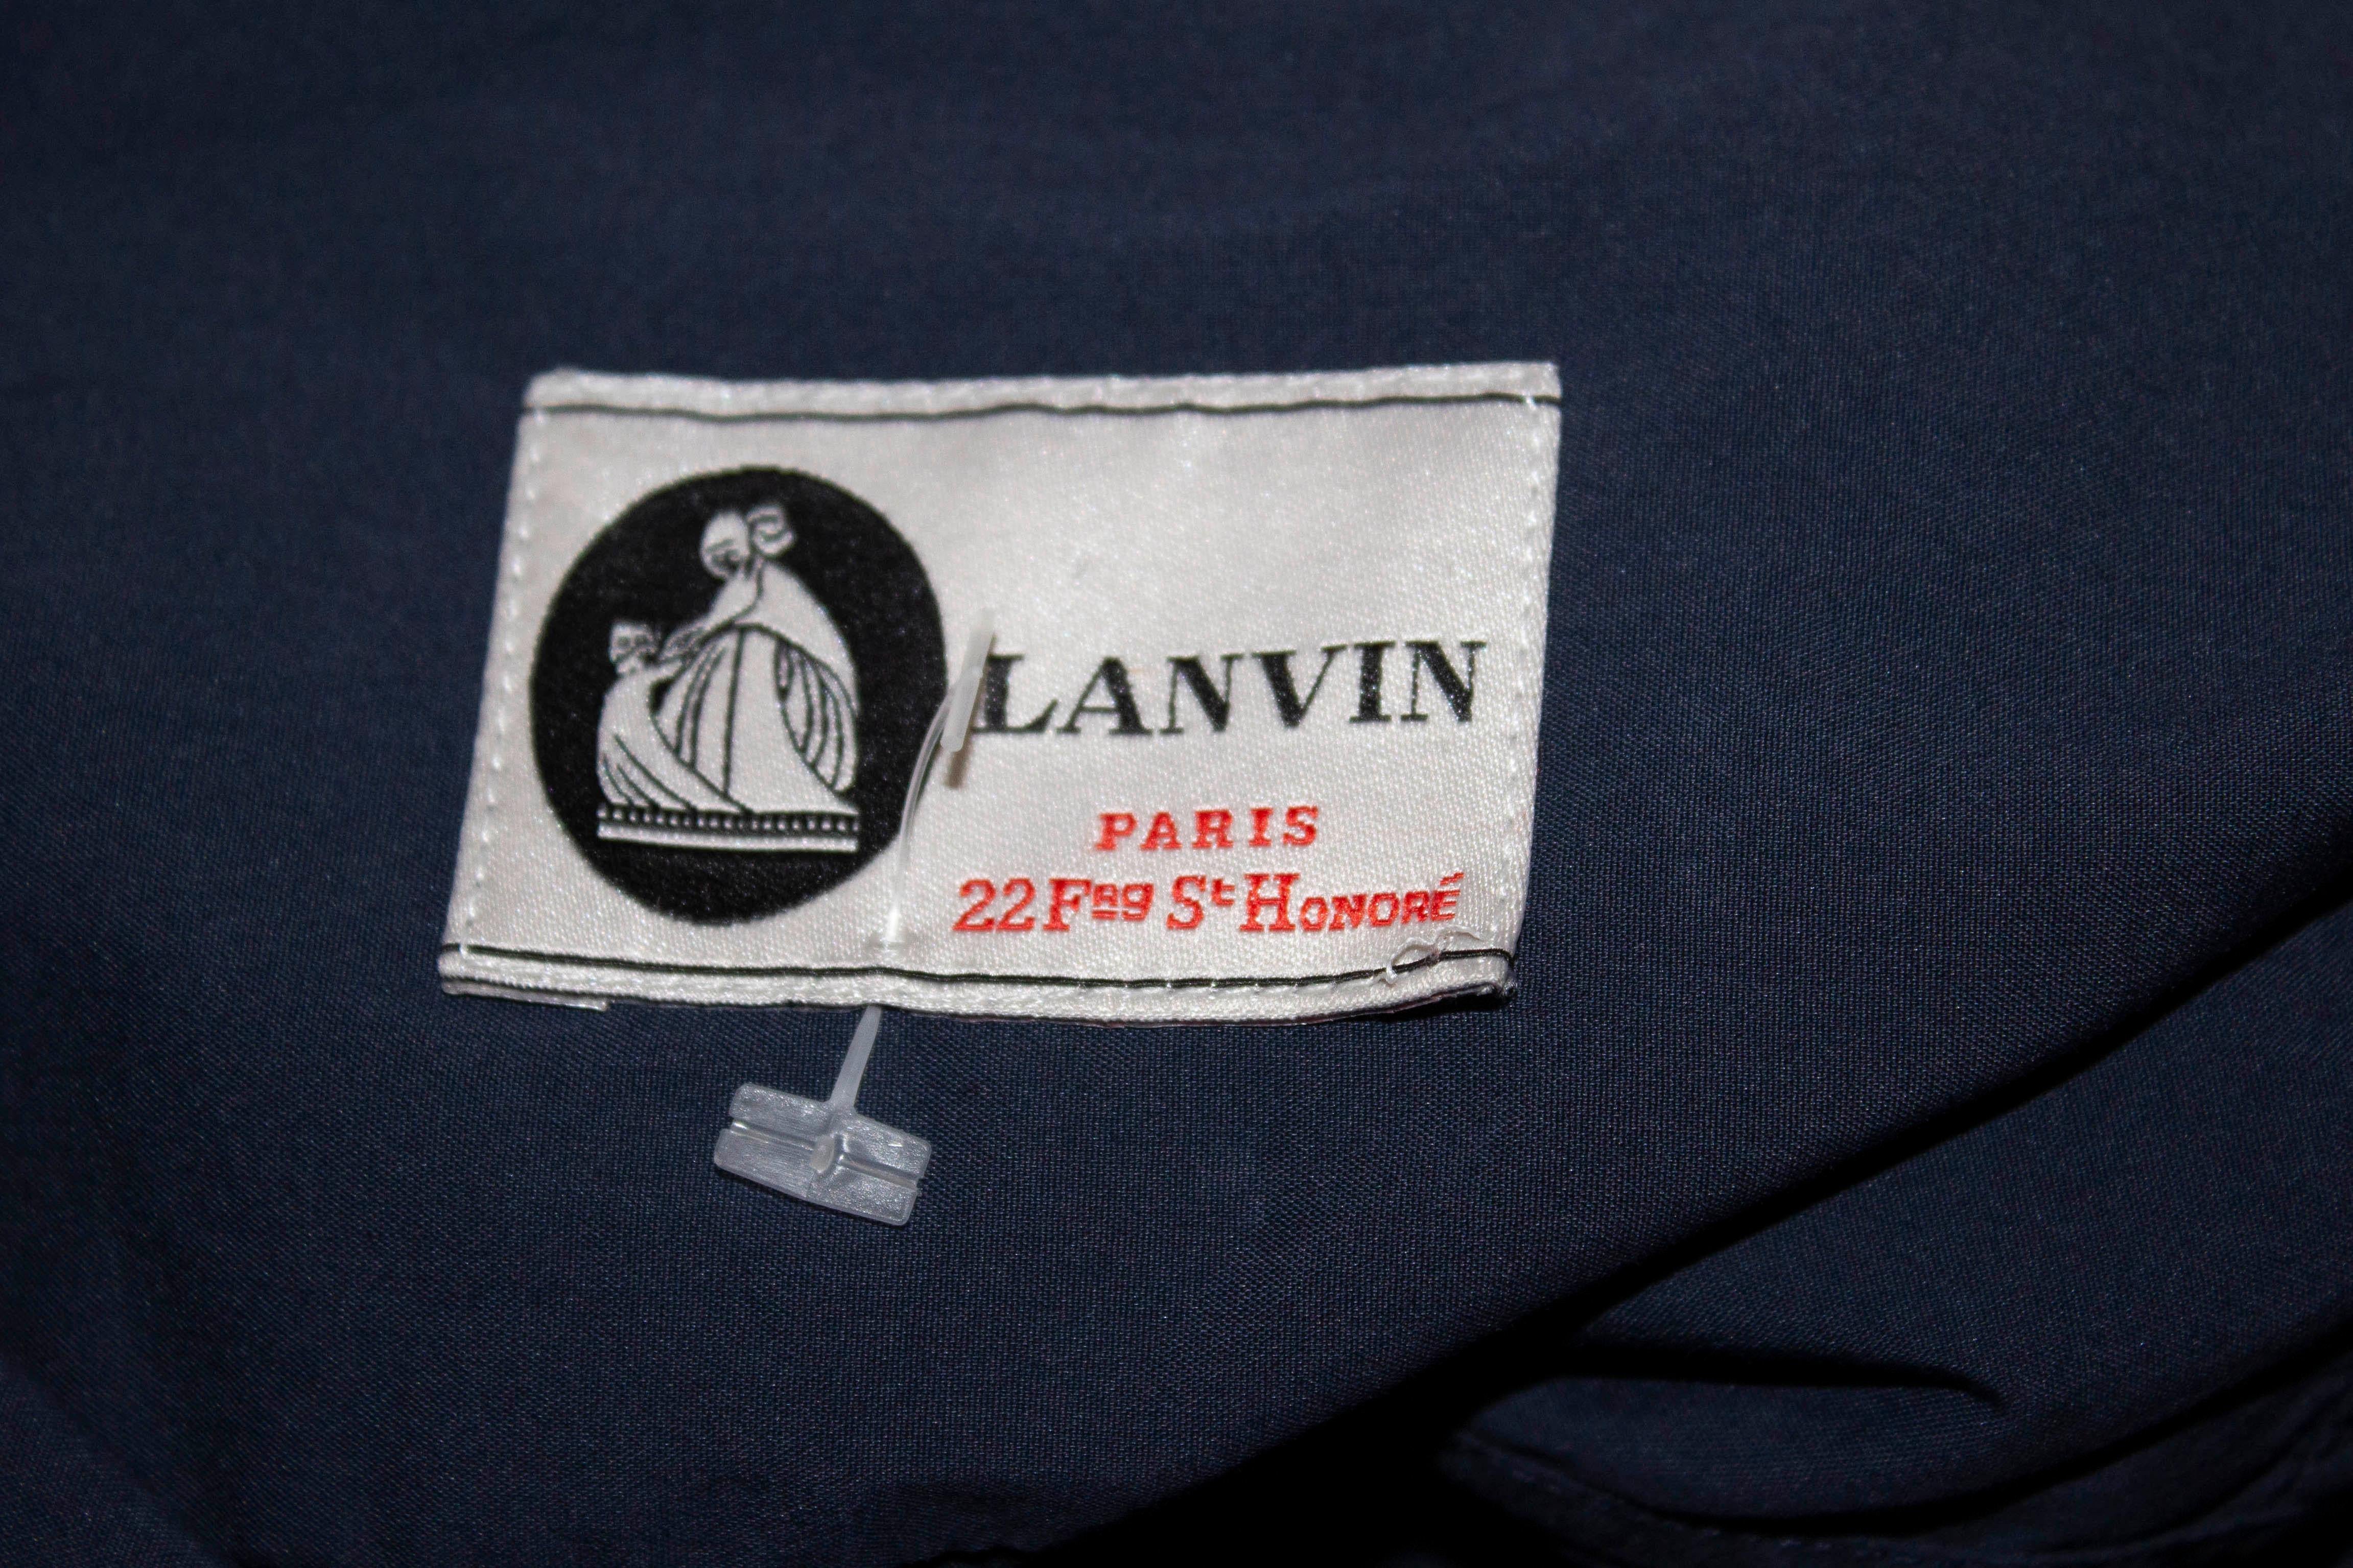 An easy to wear shirt for Summer  by Lanvin. The shirt has a white collar and blue body. It is sleaveless with a front button opening and slits on either side.
Size 42 ( italian) Bust up to 41'', length 31''.